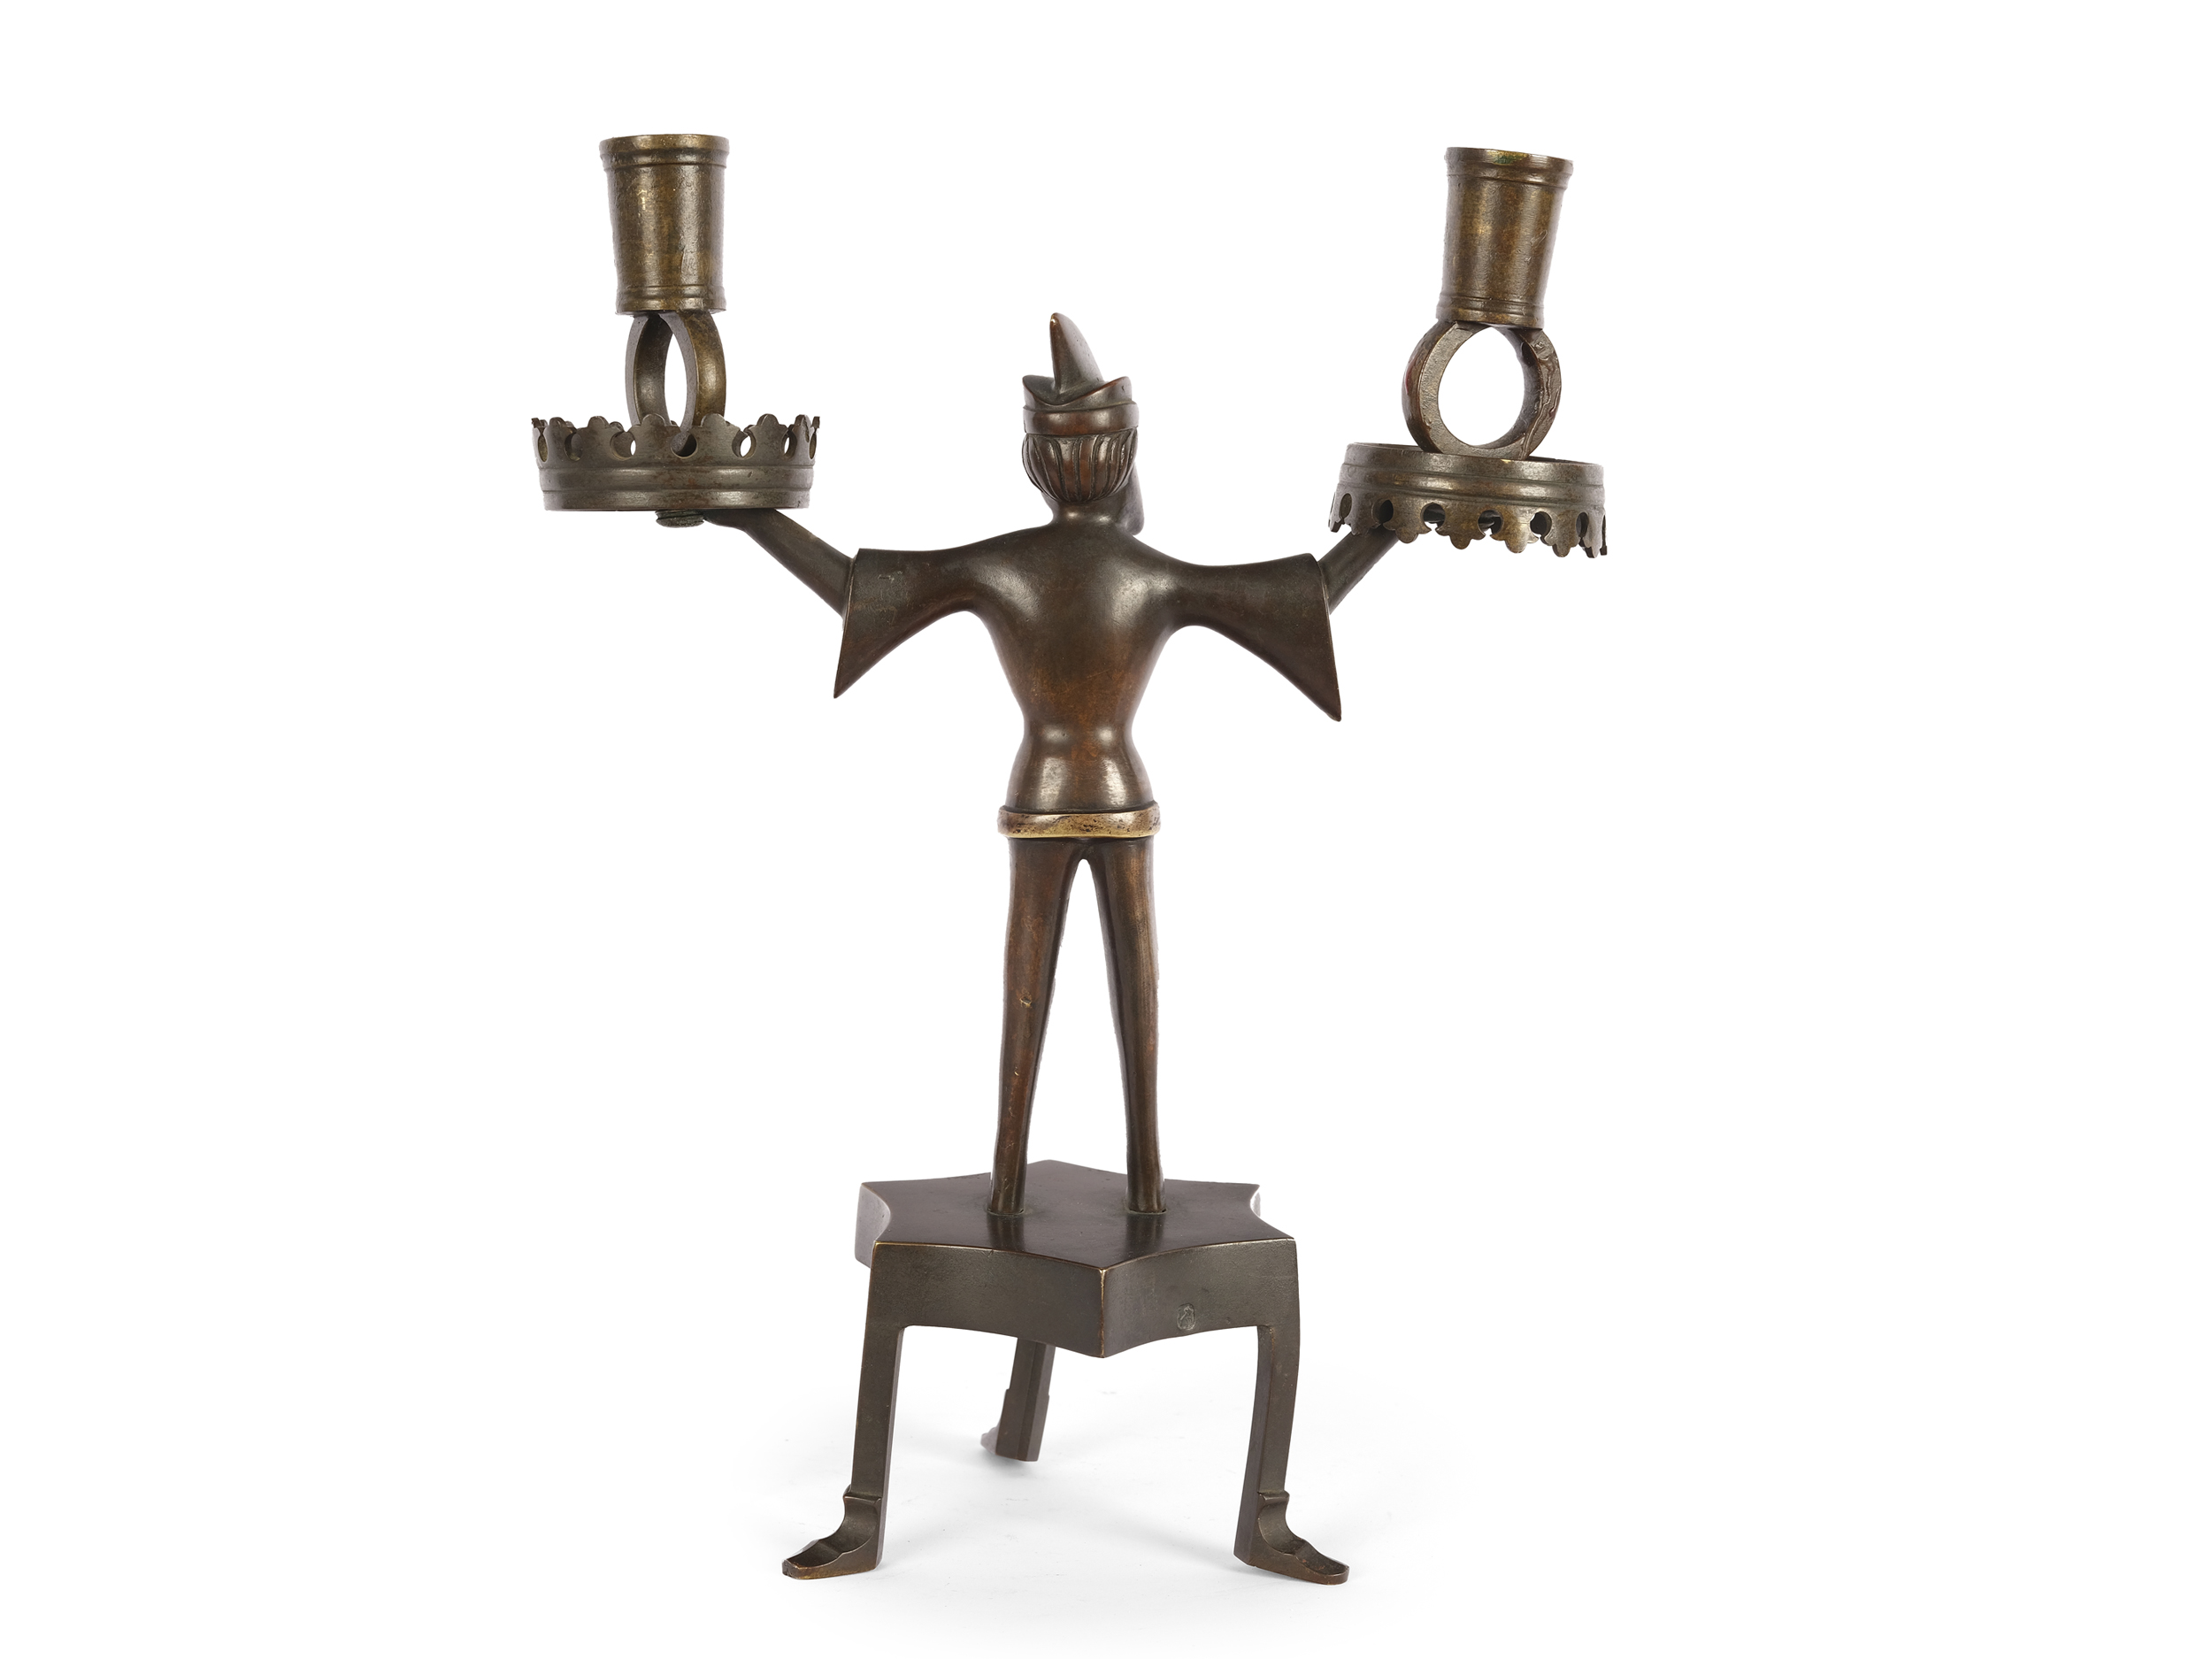 Candlestick with miner, two-armed, in the 15th century style - Image 3 of 4